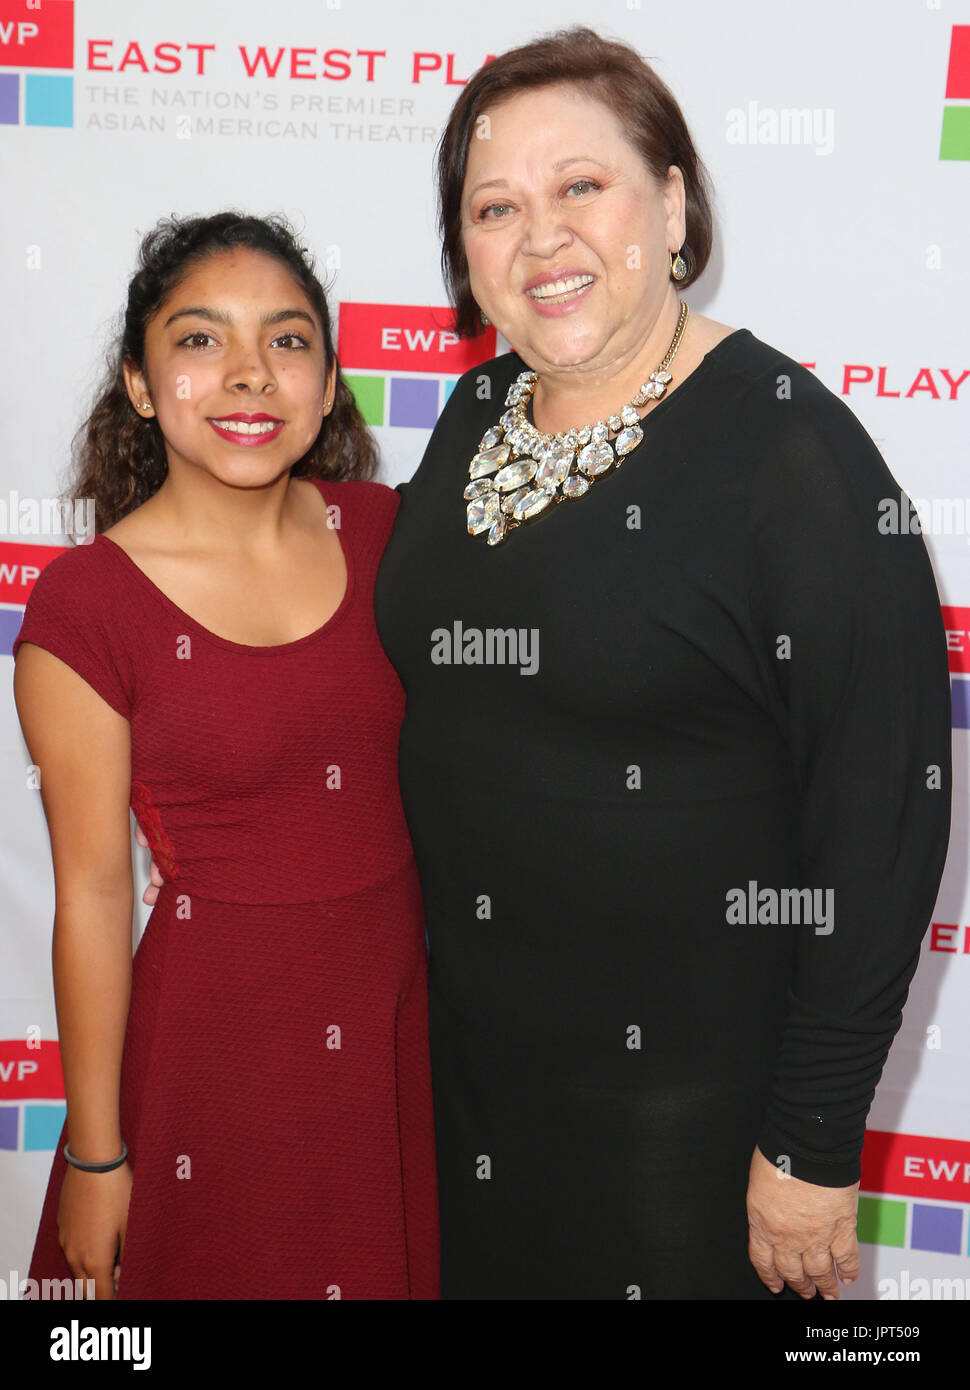 Amy Hill & Daughter Penelope Hill at the East West Players' 50th Anniversary Visionary Awards held at the Hilton Universal in Universal City, CA on Monday April 20, 2015. Photo by Steven Lam. Stock Photo